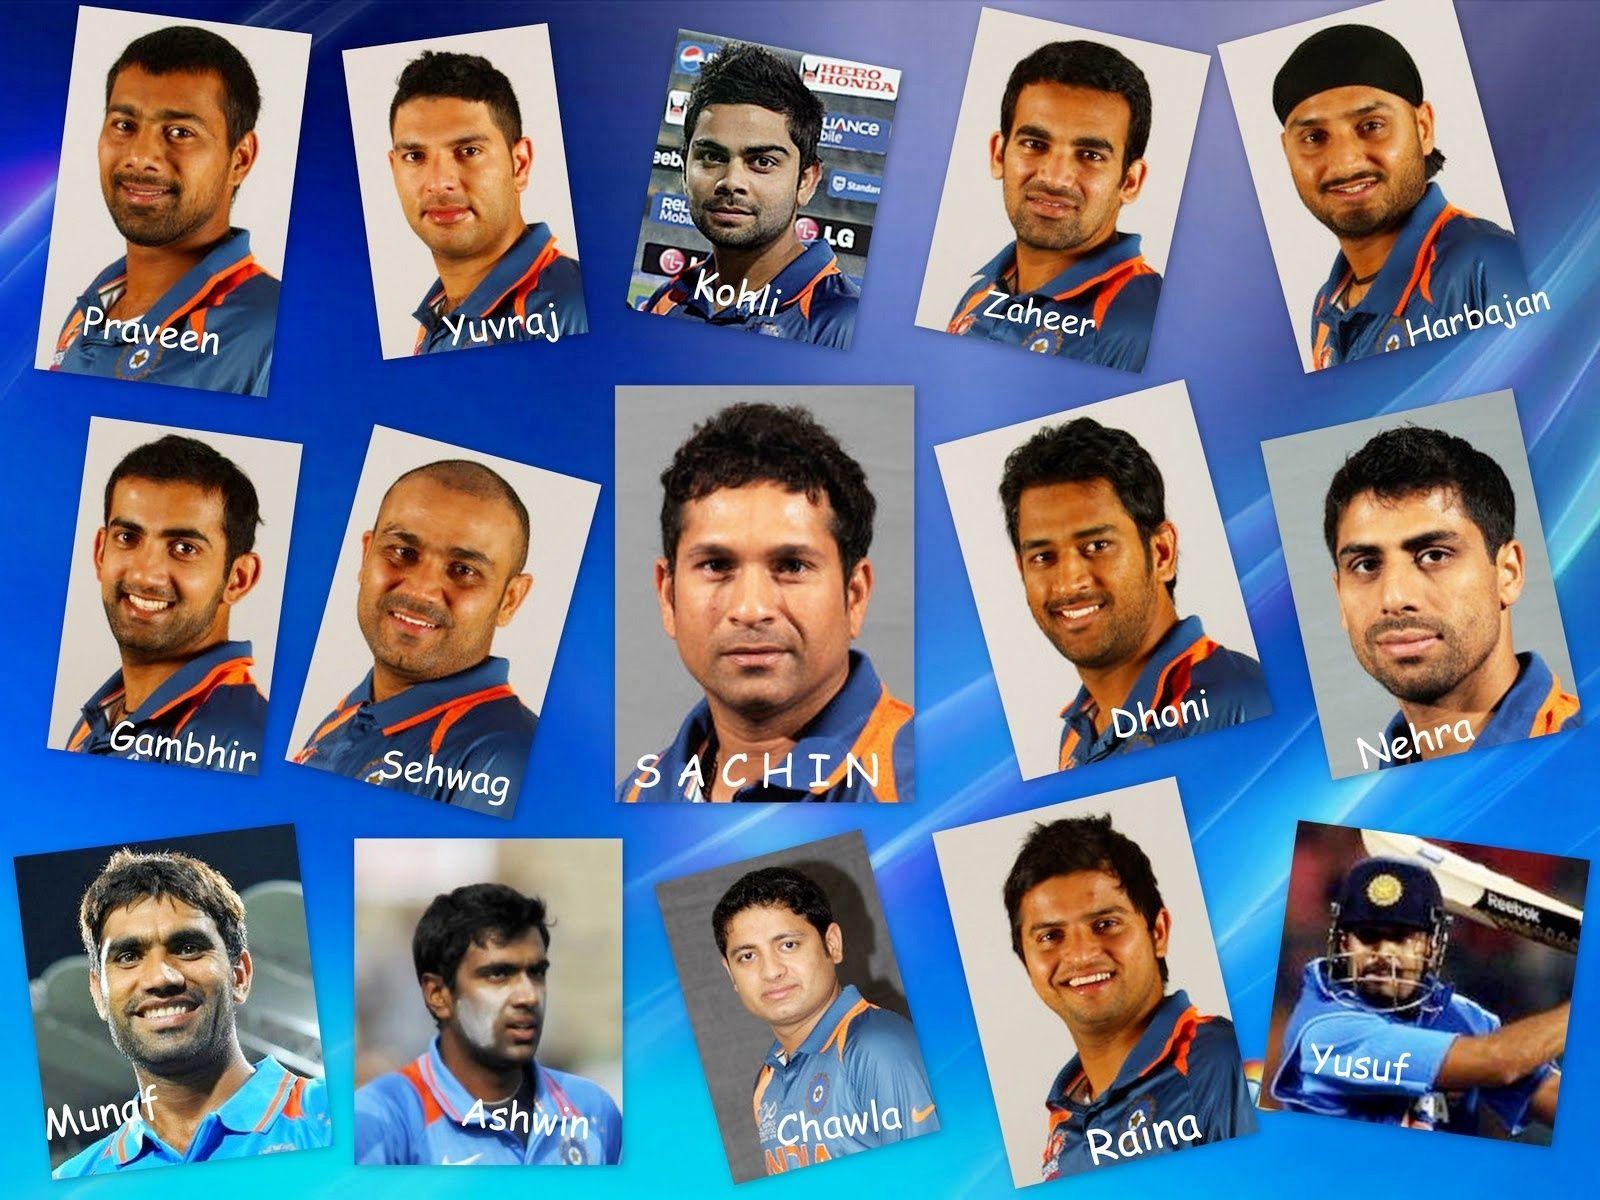 Team India World Cup Wallpaper in jpg format for free download